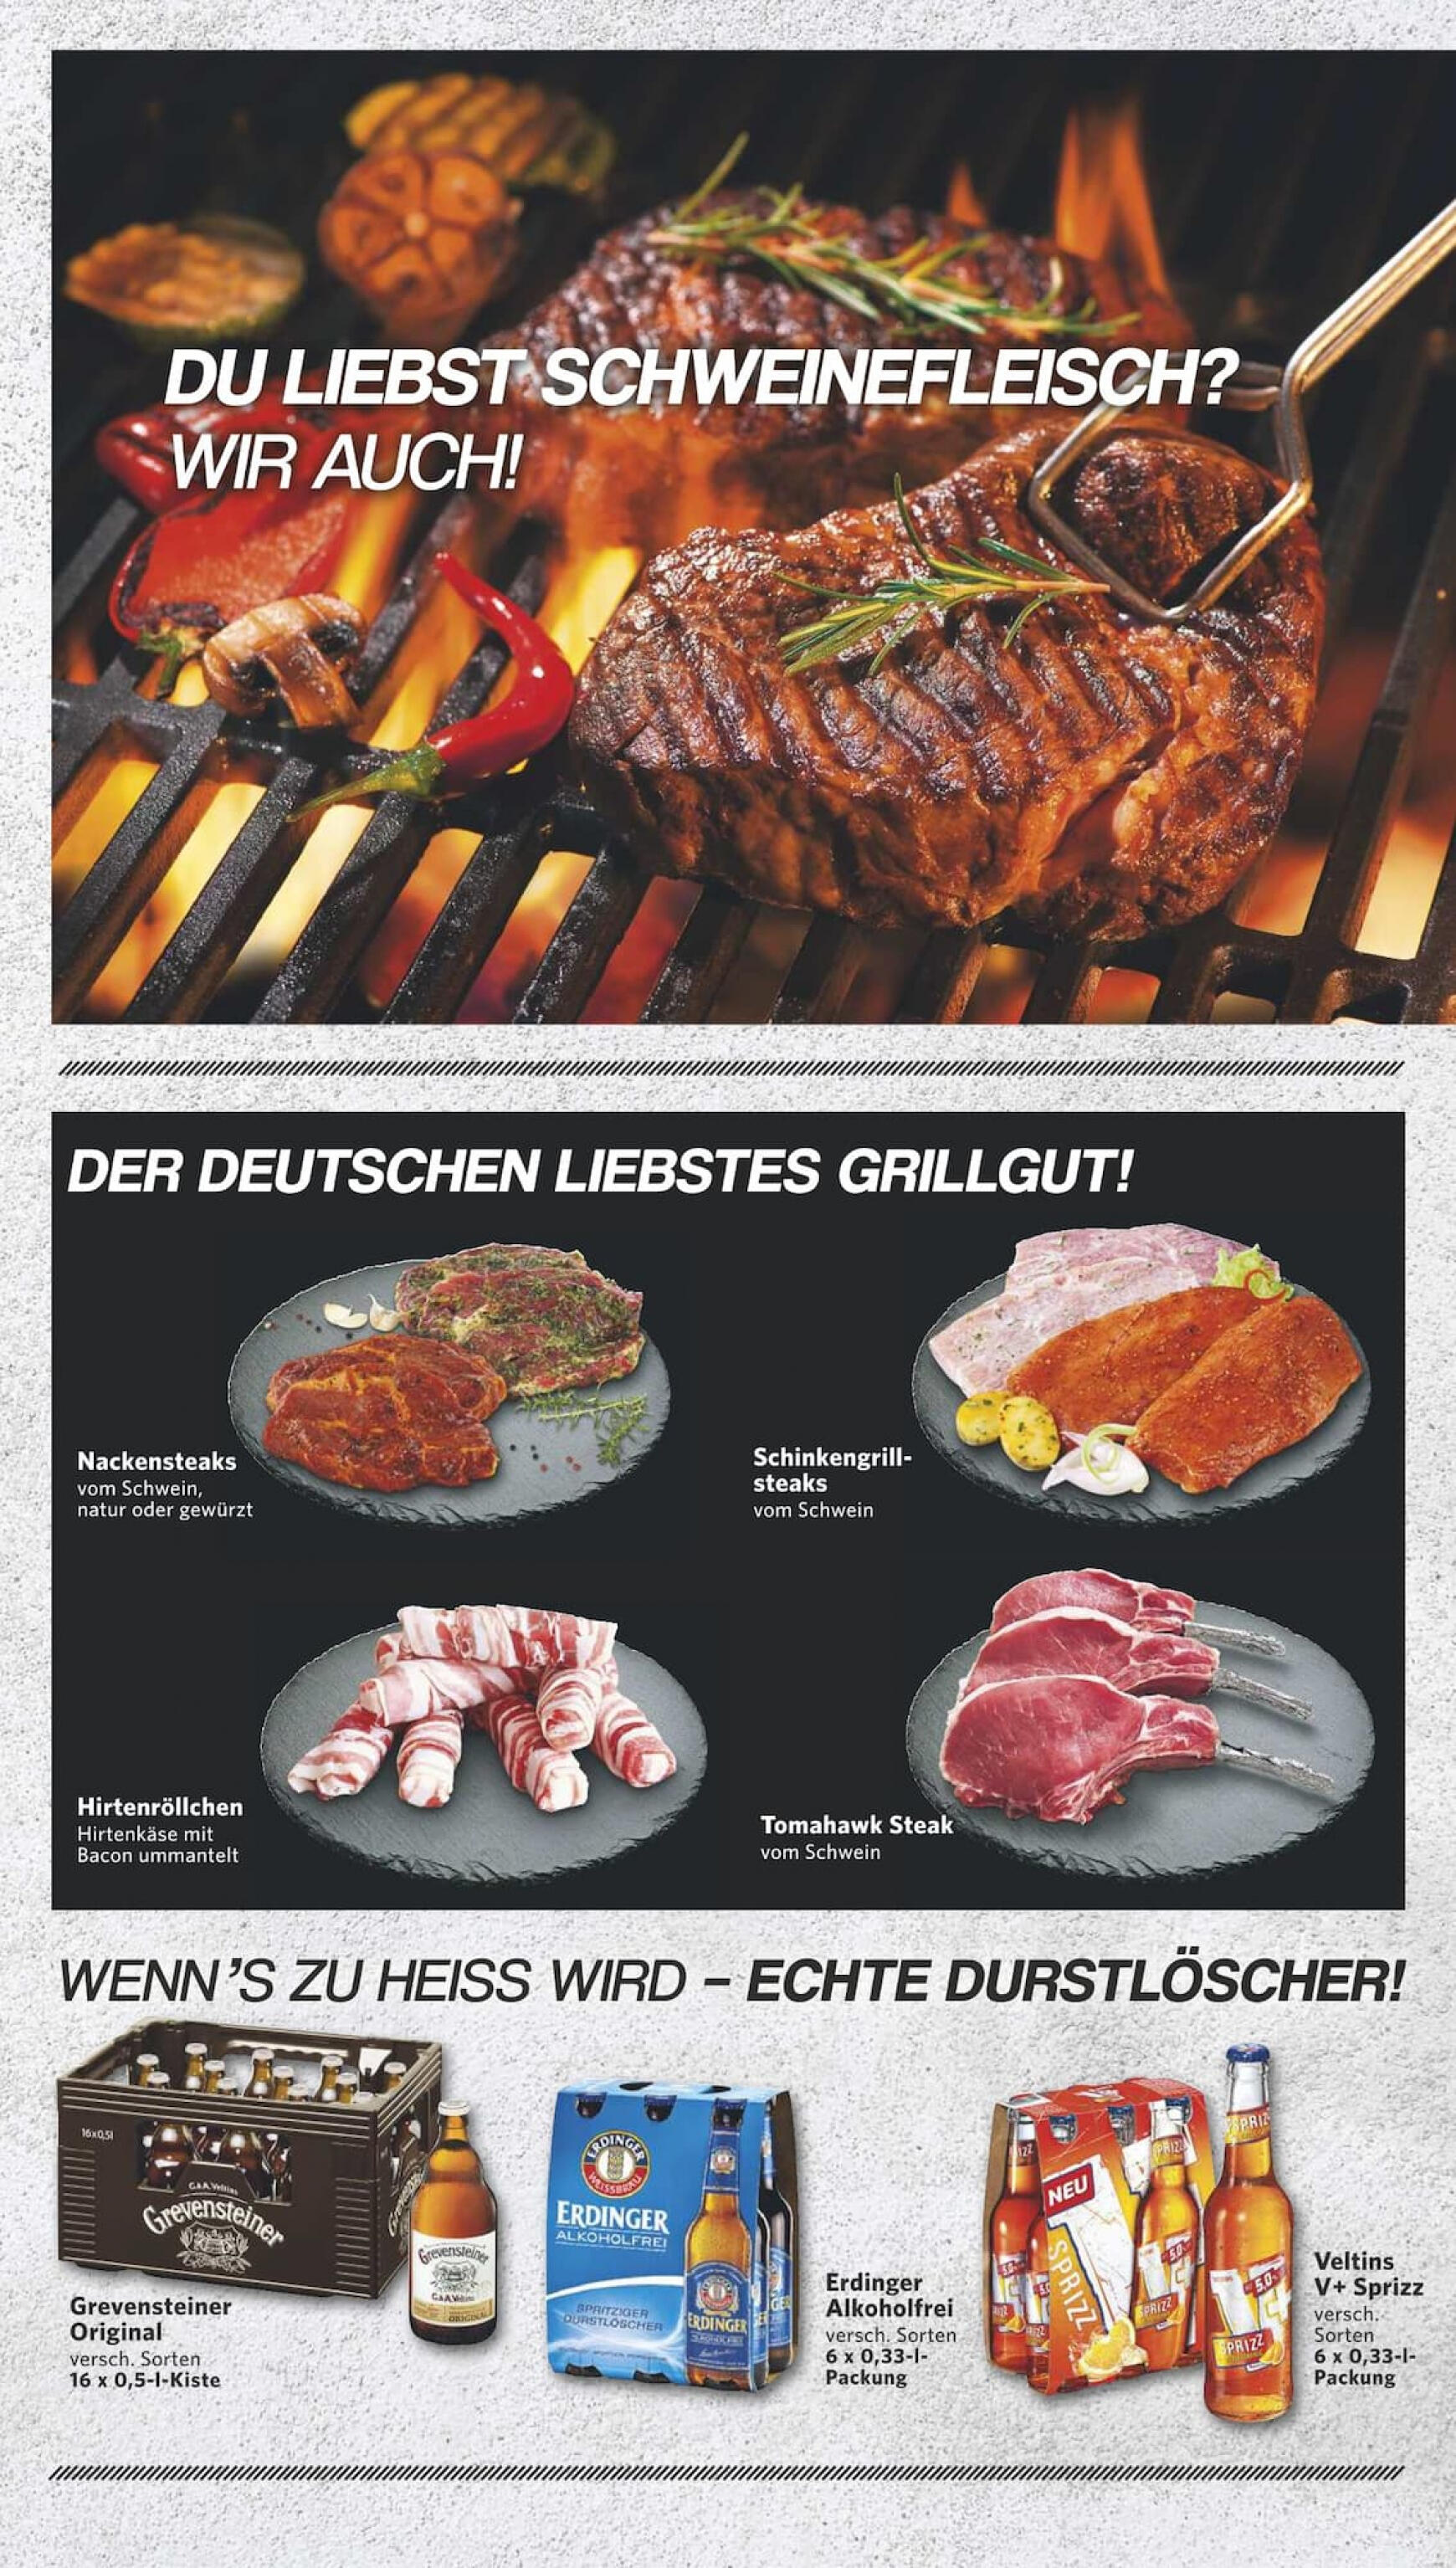 famila-nordwest - Flyer Famila Nordwest - Famila Grillecke aktuell 21.04. - 27.04. - page: 3